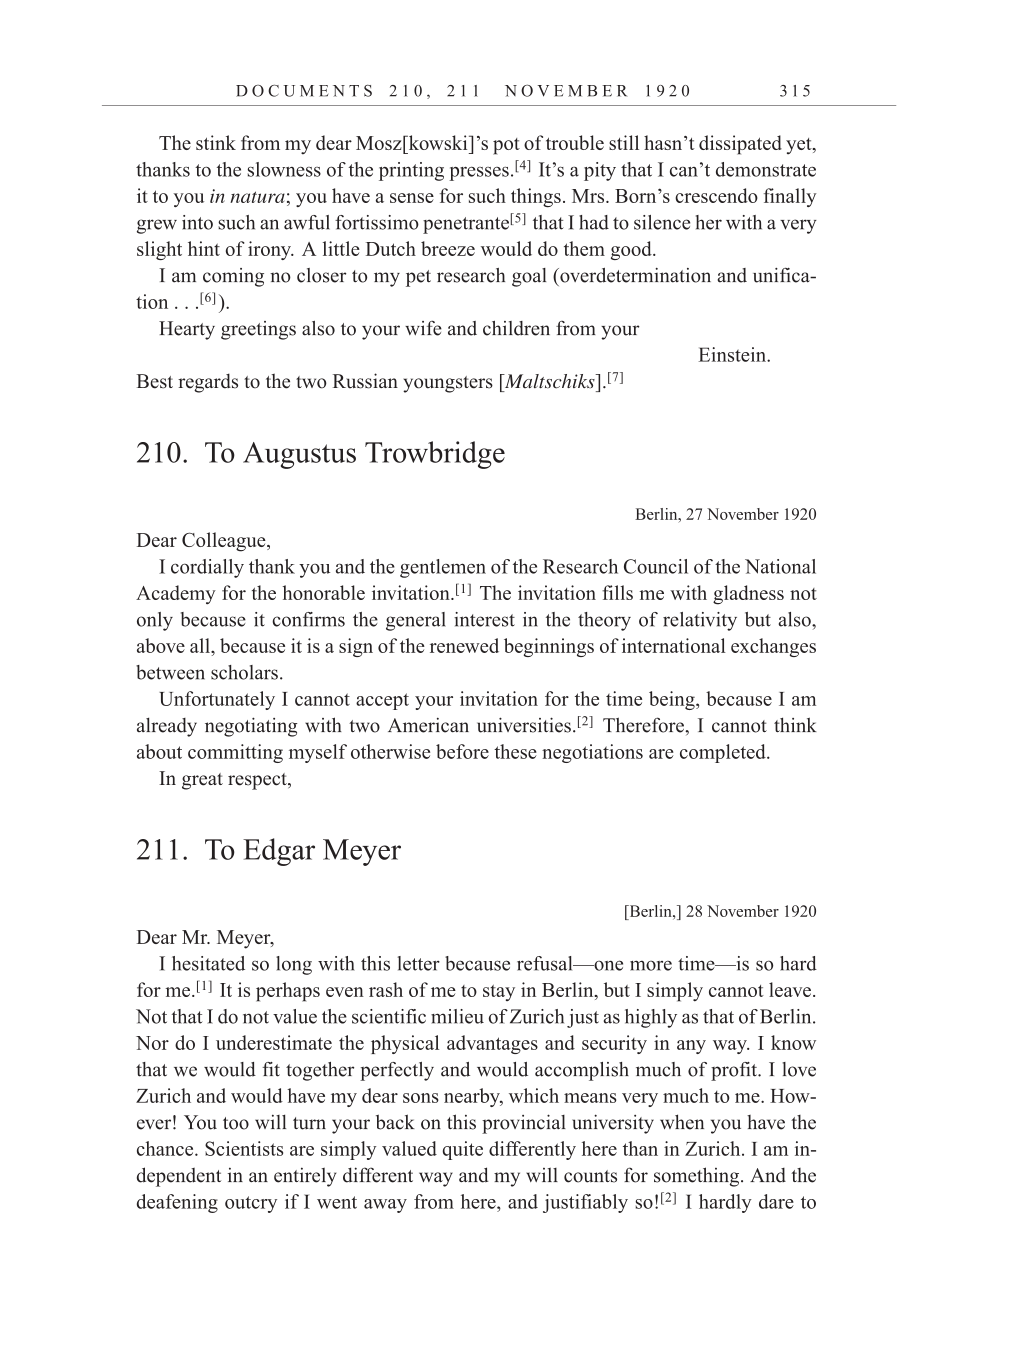 Volume 10: The Berlin Years: Correspondence, May-December 1920, and Supplementary Correspondence, 1909-1920 (English translation supplement) page 315